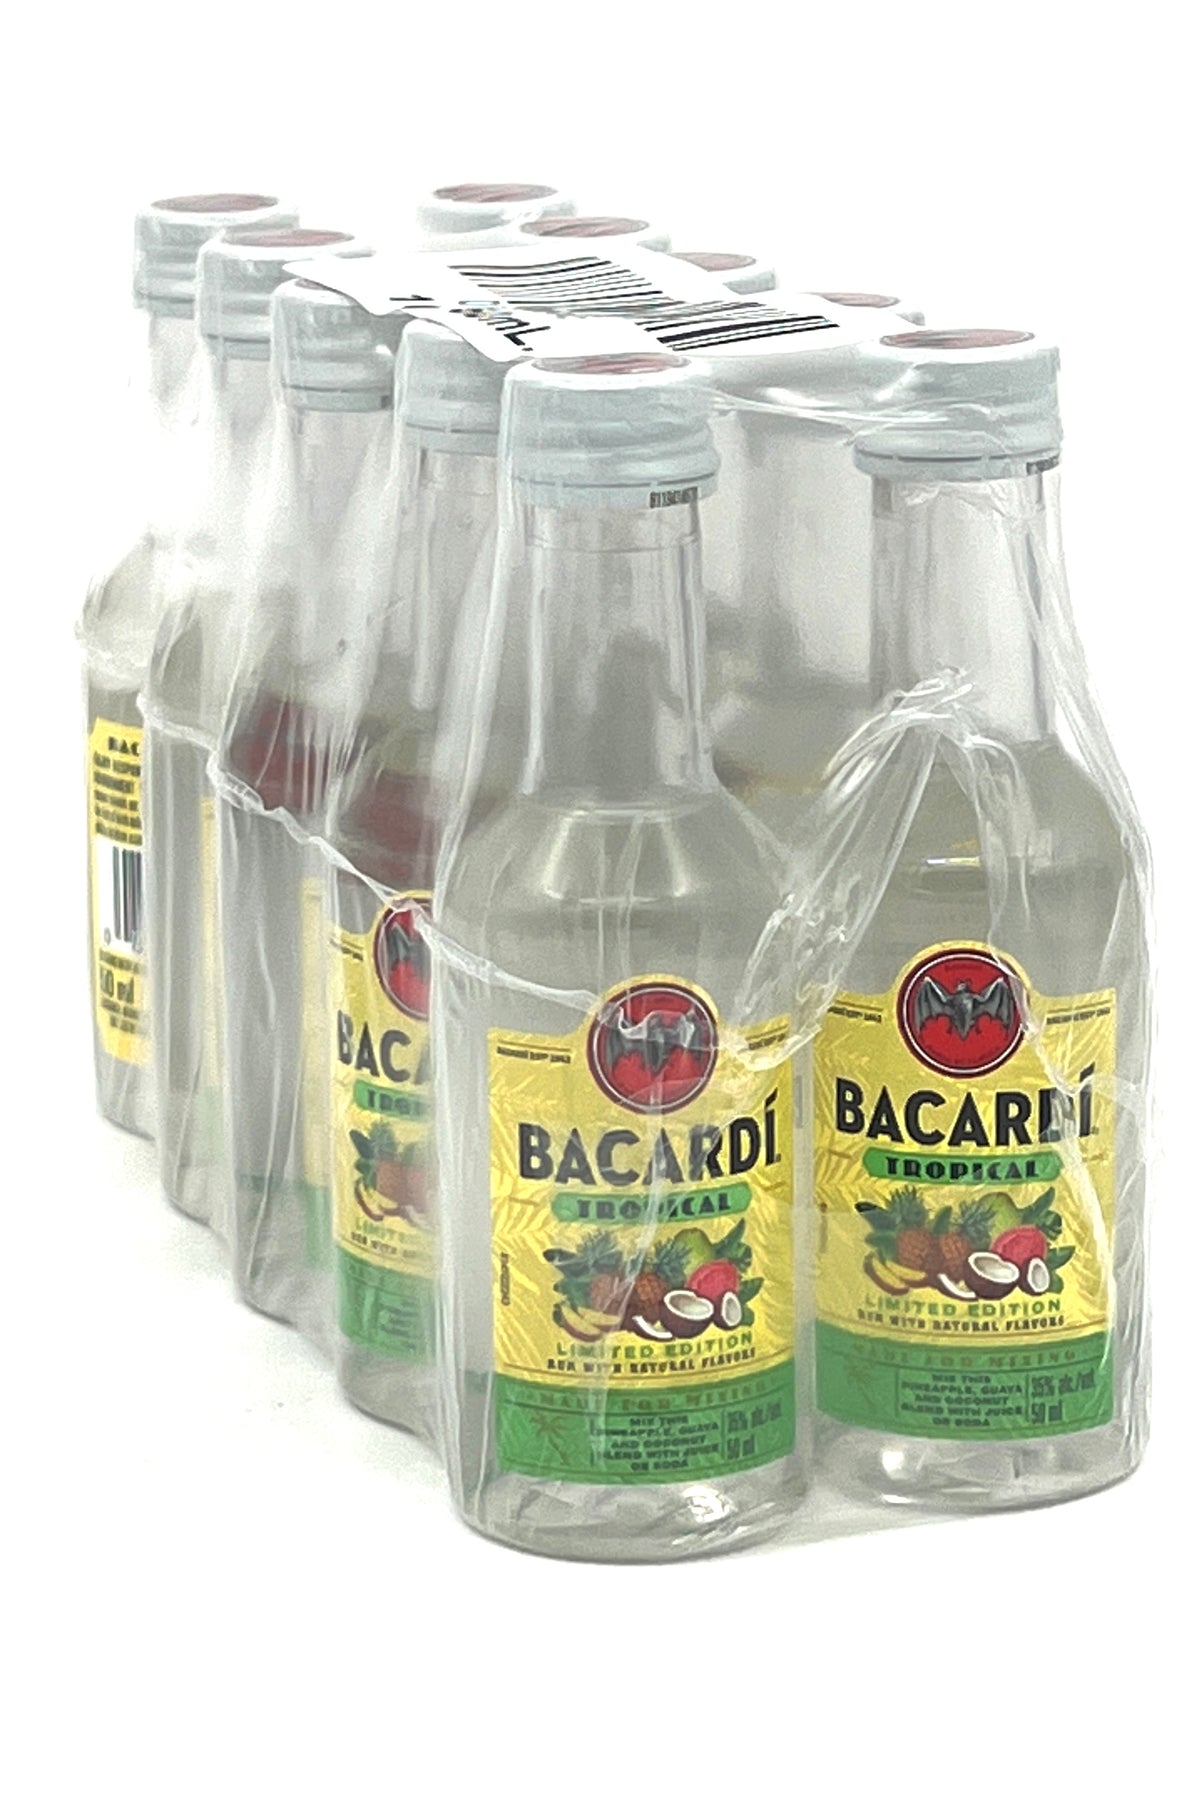 Bacardi Tropical-Flavored Rum Limited Edition 10 x 50 ml